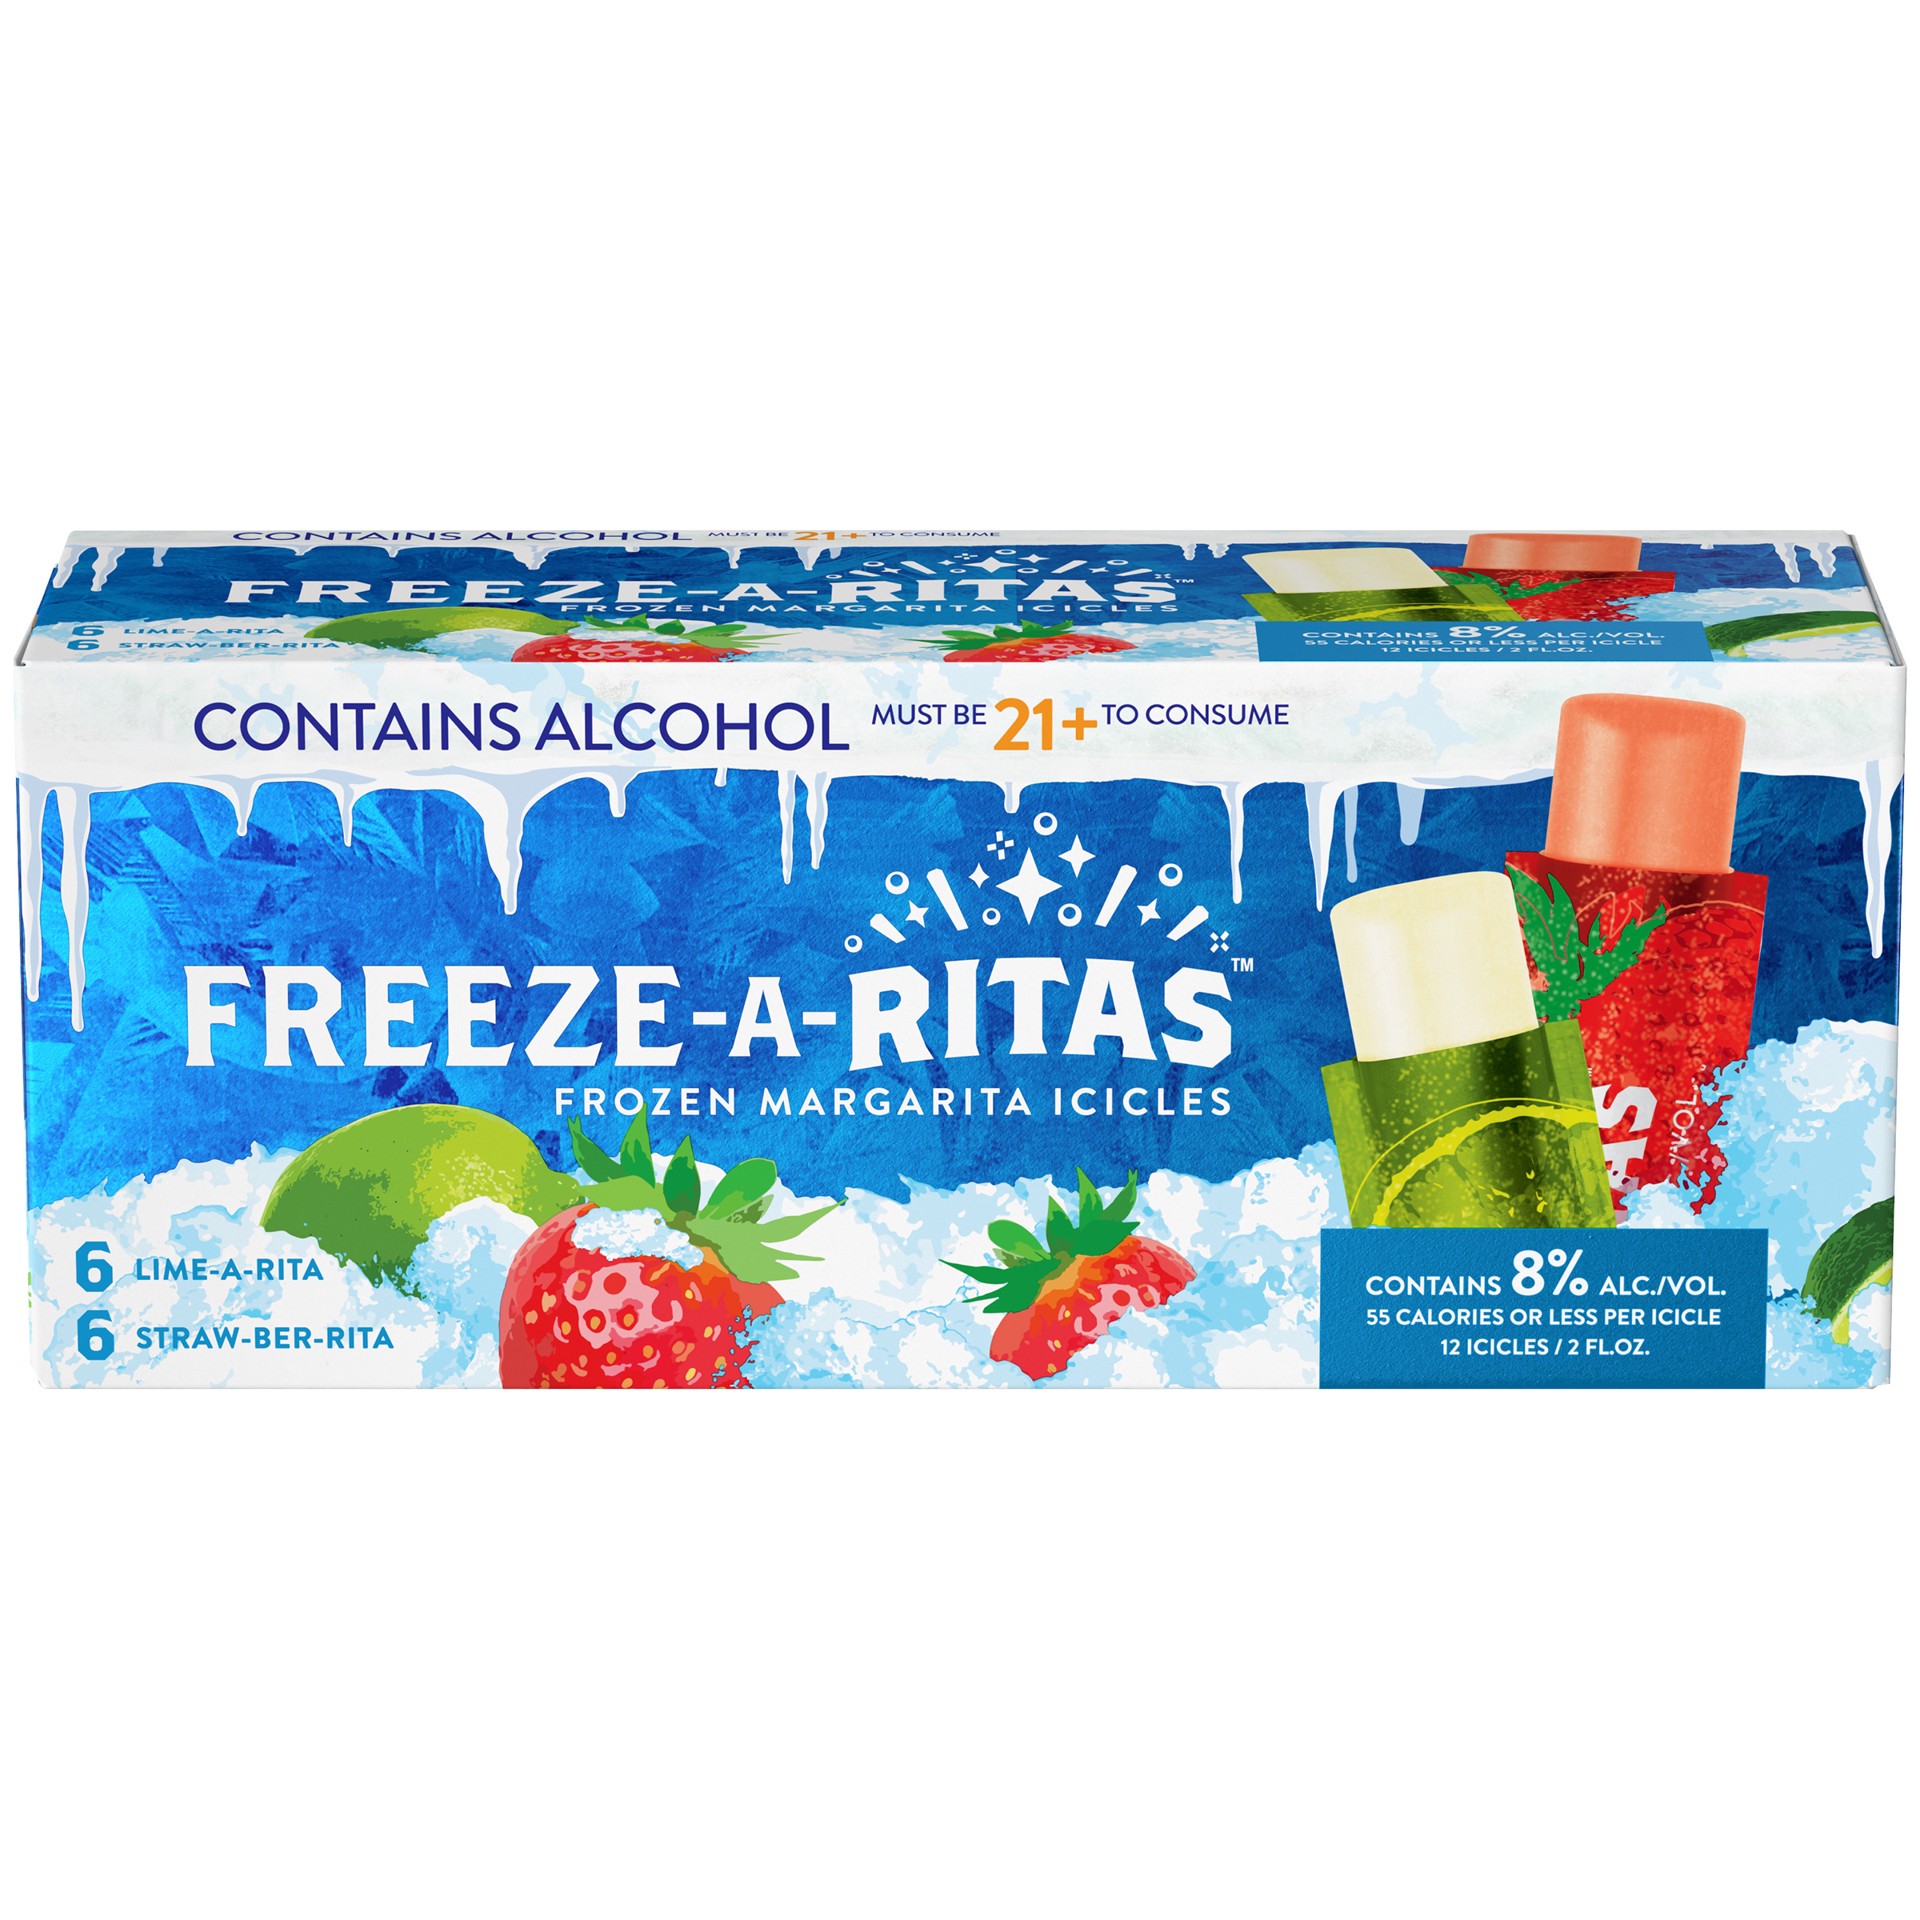 slide 3 of 3, Freeze-A-Ritas Lime-A-Rita & Straw-Ber-Rita Frozen Margarita Icicles Variety Pack, 12 Pack 2 fl. oz. Pouches, 8% ABV, 12 ct